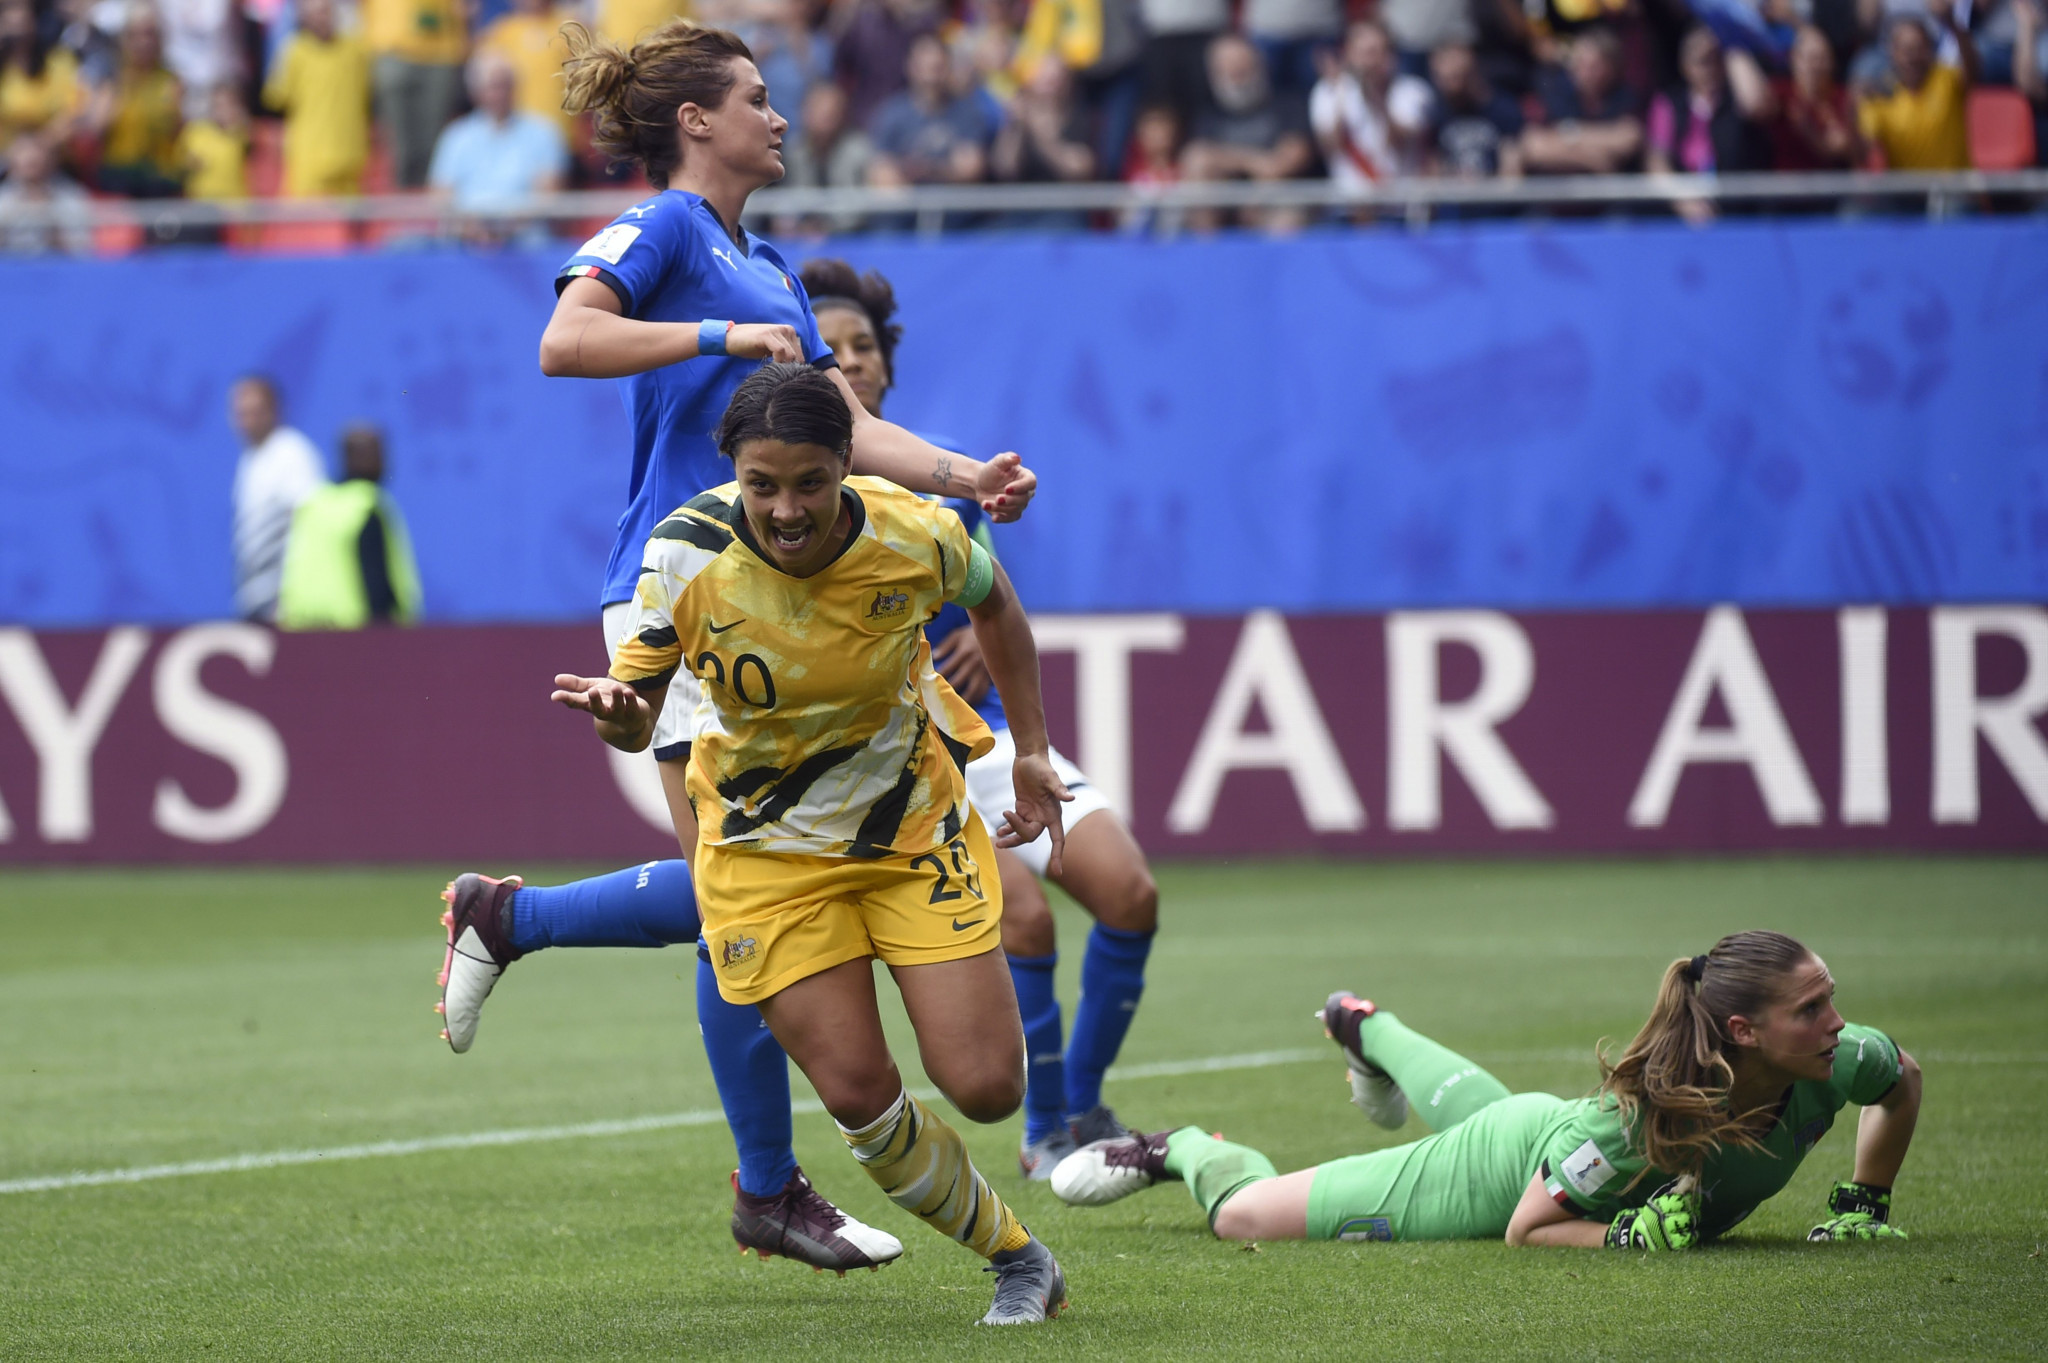 Sam Kerr put Australia ahead against Italy on the rebound having seen her penalty saved ©Getty Images